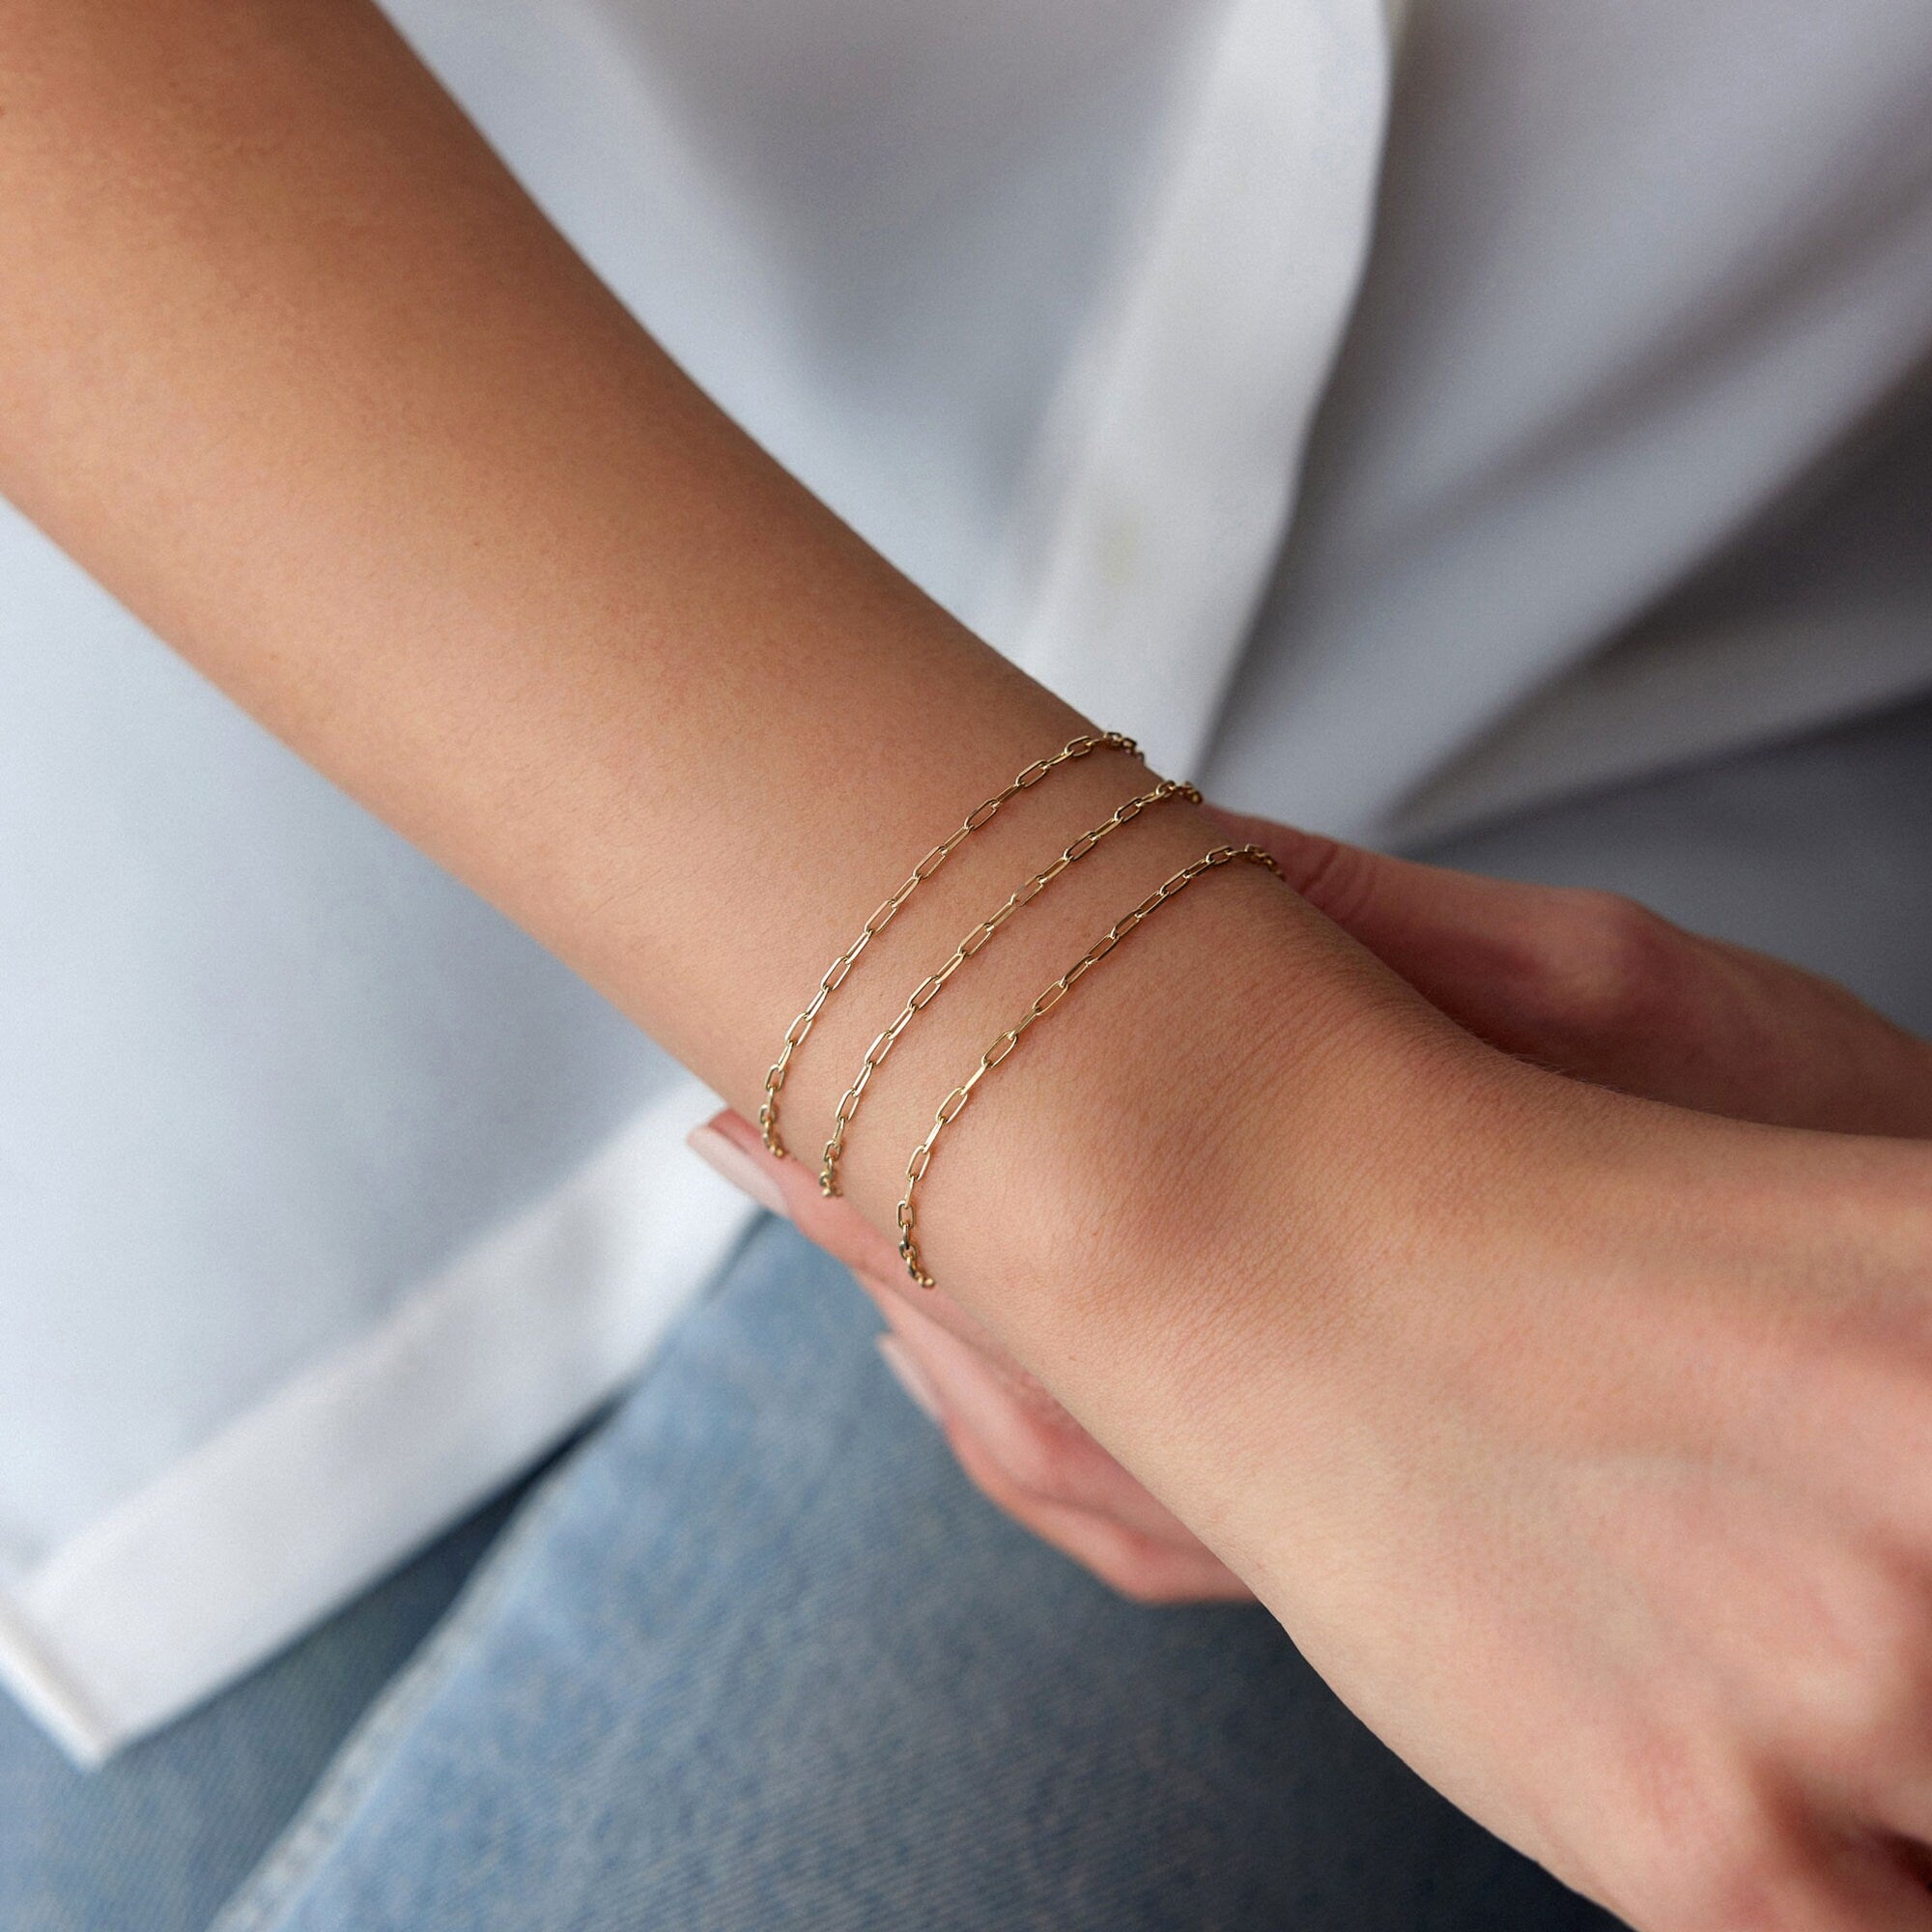 Thin Paperclip Chain Bracelet in 14K Gold